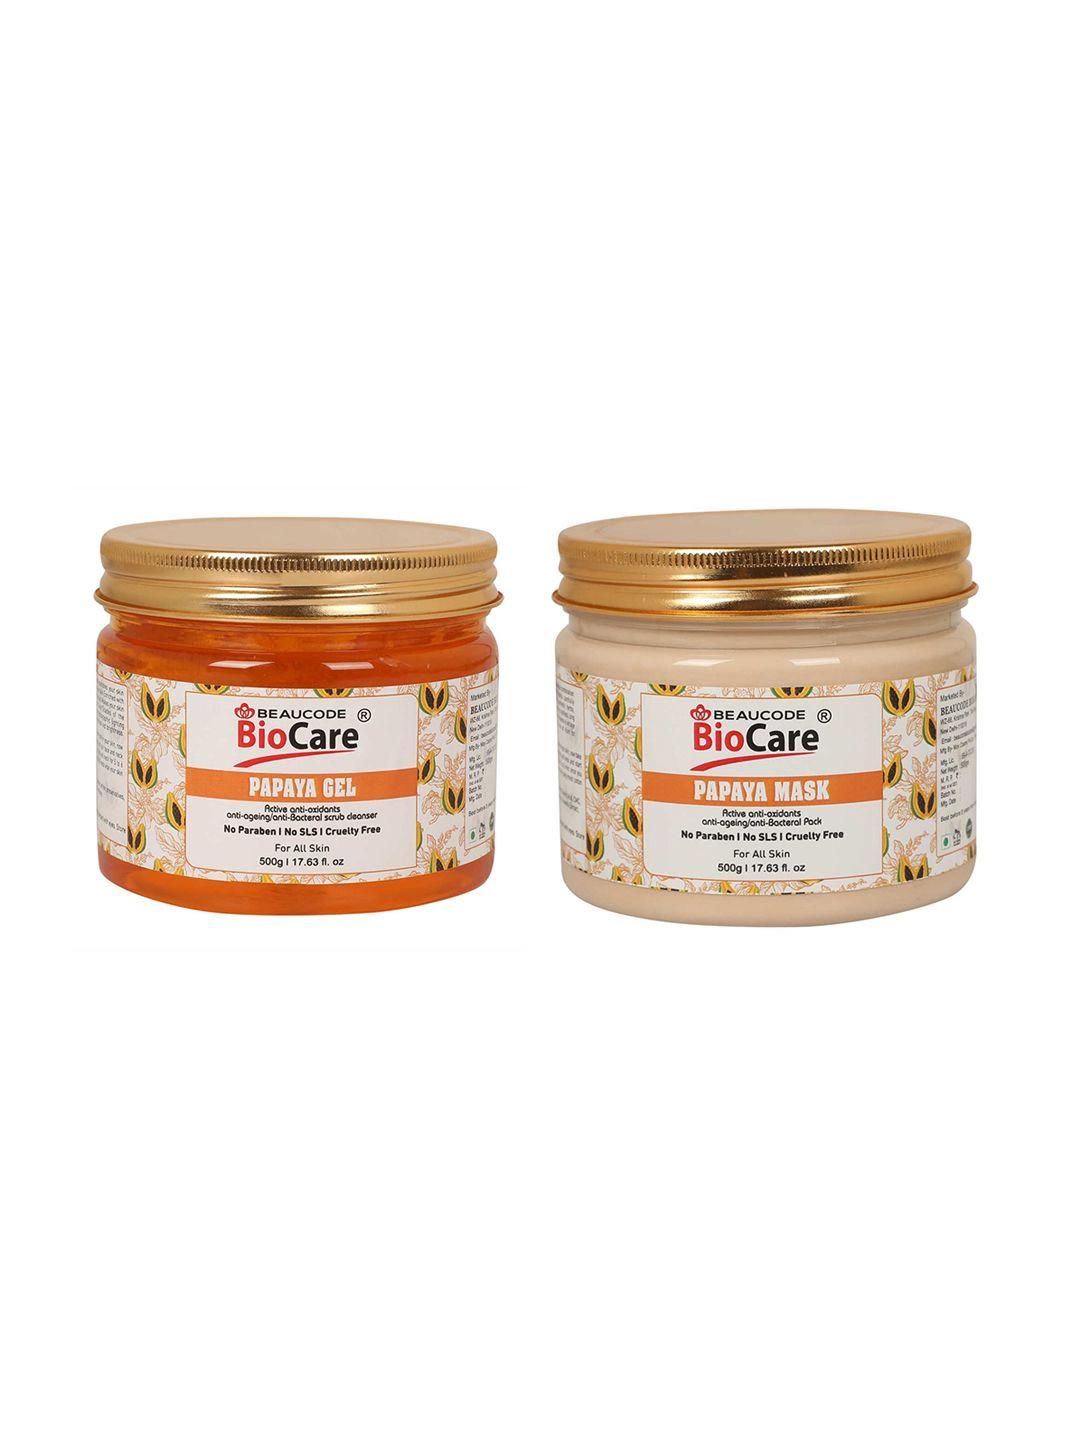 beaucode-biocare-set-of-2--papaya-face-and-body-gel-and-mask-1kg